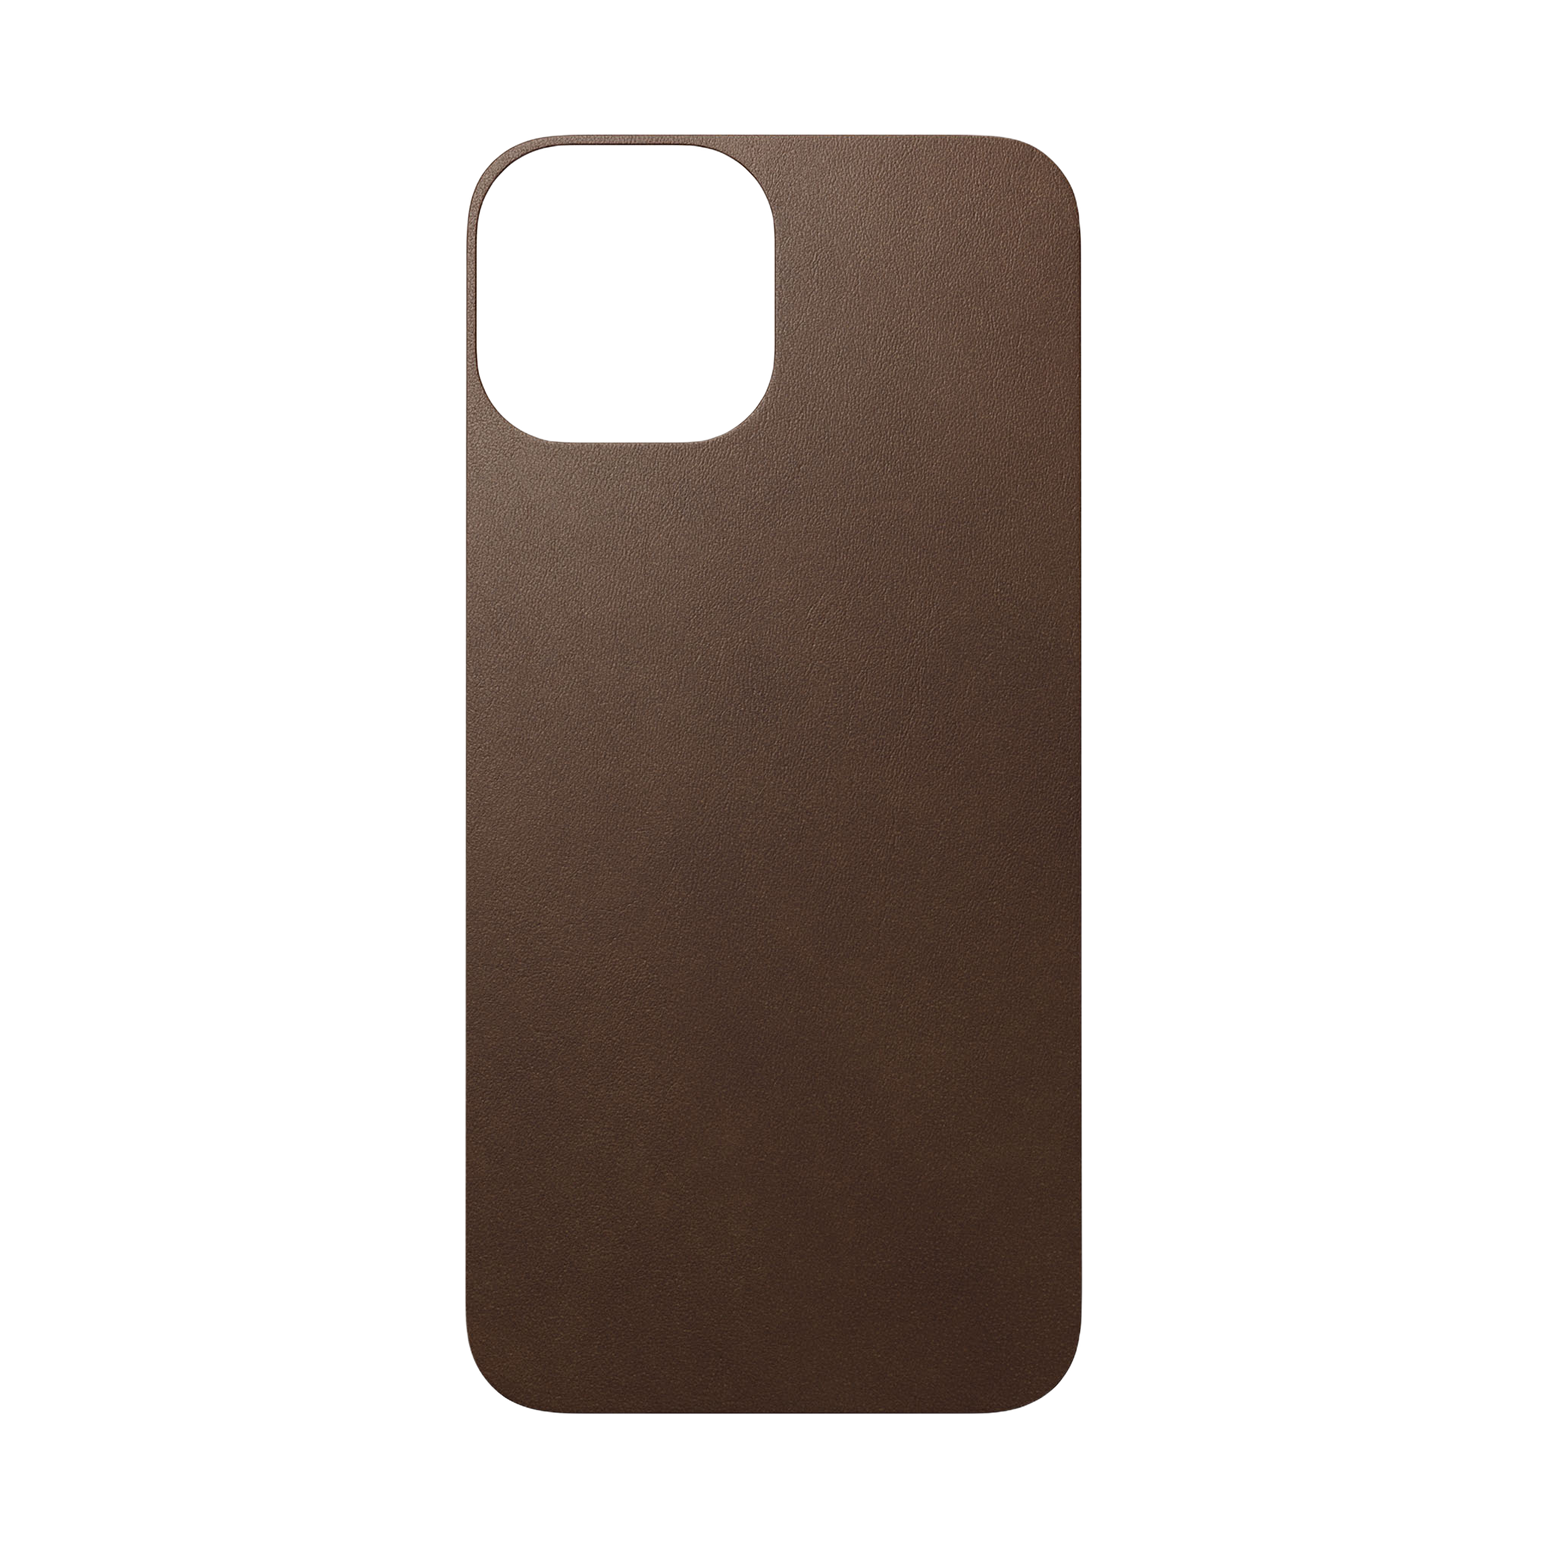 Nomad Skin with Horween Leather for iPhone 13 mini - Rustic Brown - Discontinued